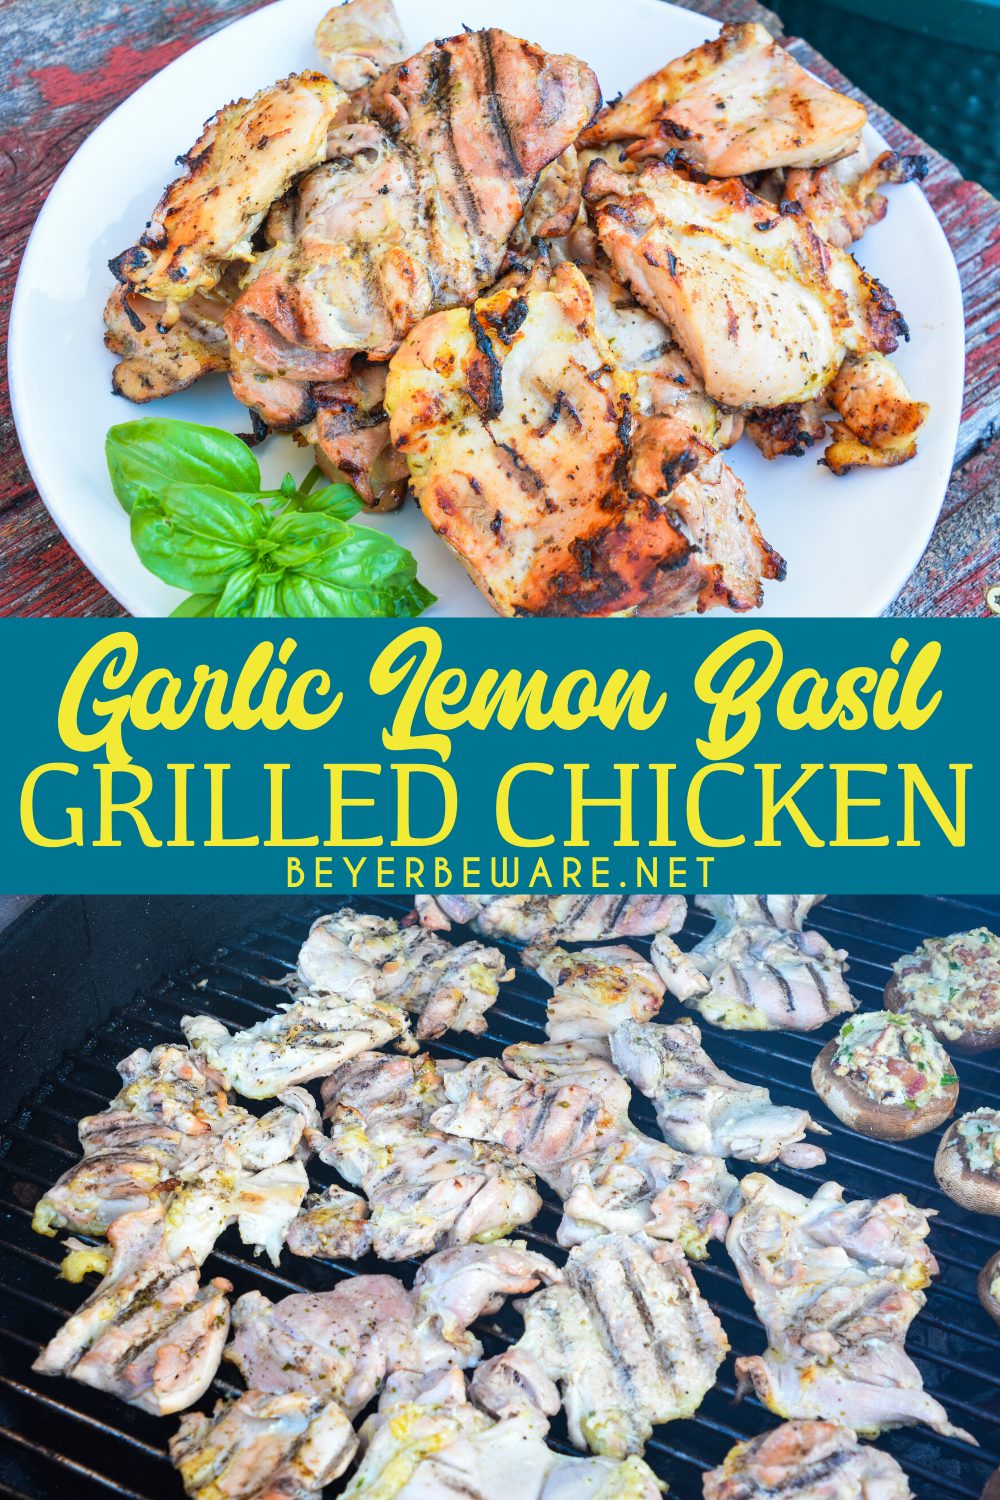 Garlic Lemon Basil Grilled Chicken is the perfect summer dinner idea. The marinade is made with white wine, lemon, limes, mustard, garlic, and basil. 